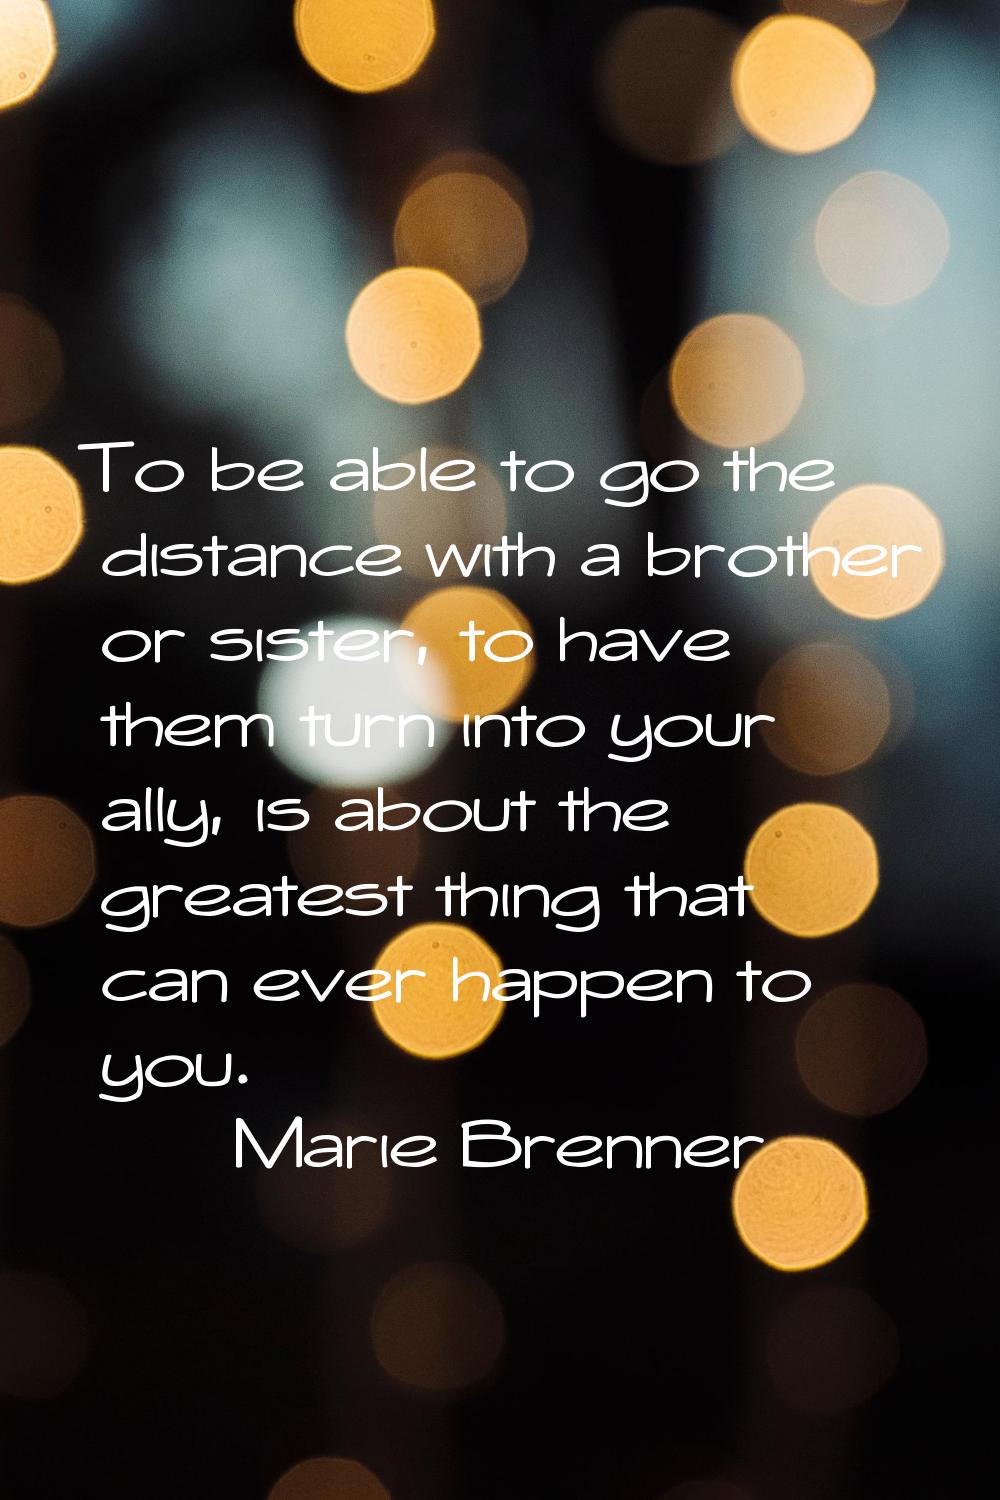 To be able to go the distance with a brother or sister, to have them turn into your ally, is about 